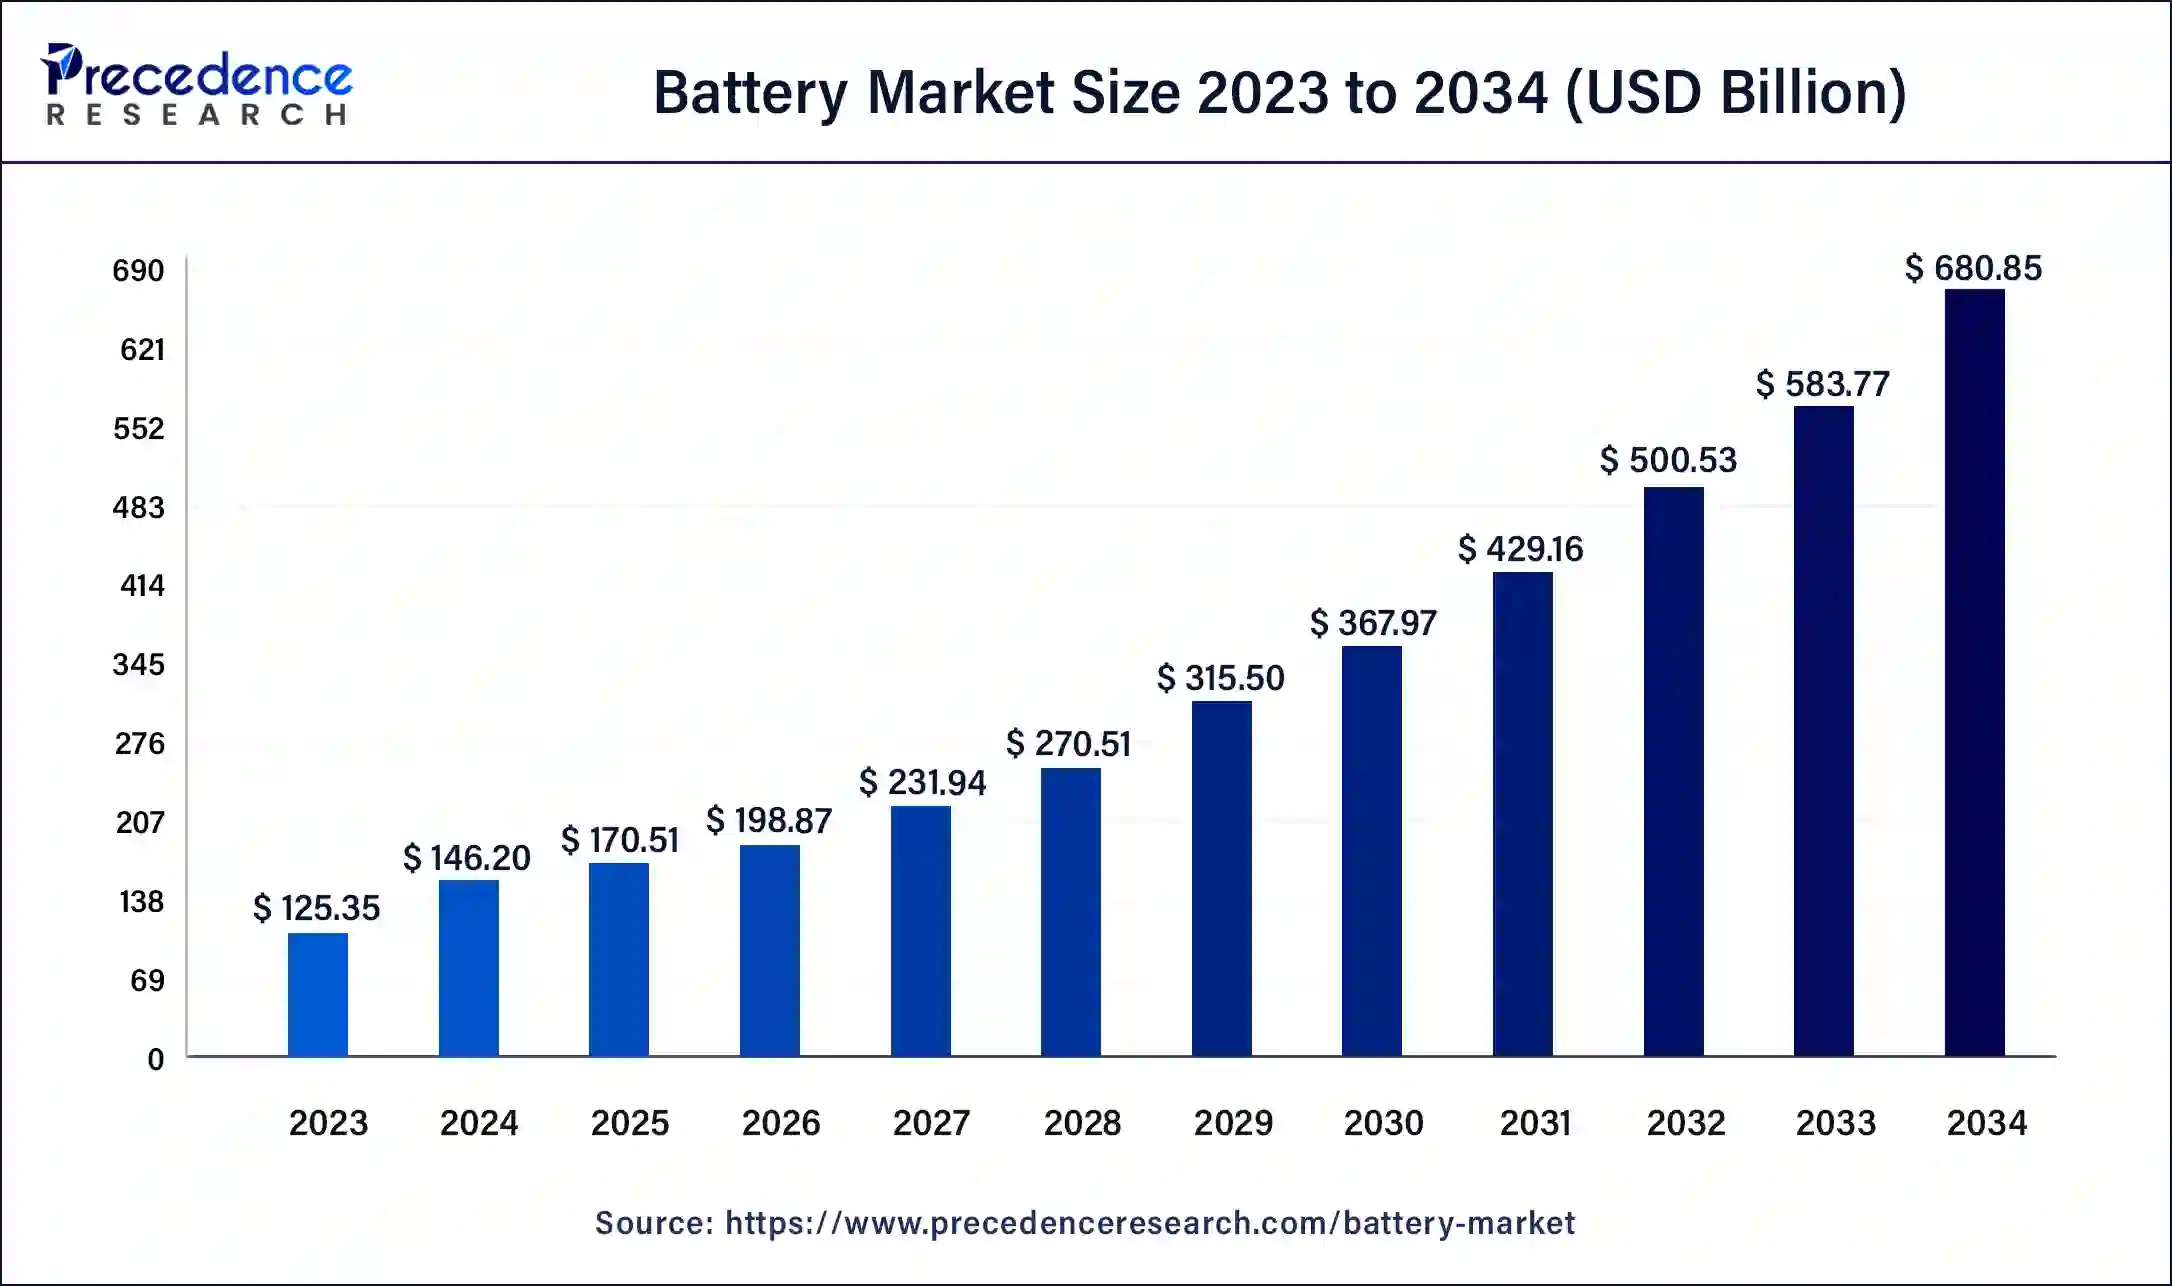 Battery Market Size 2024 to 2034